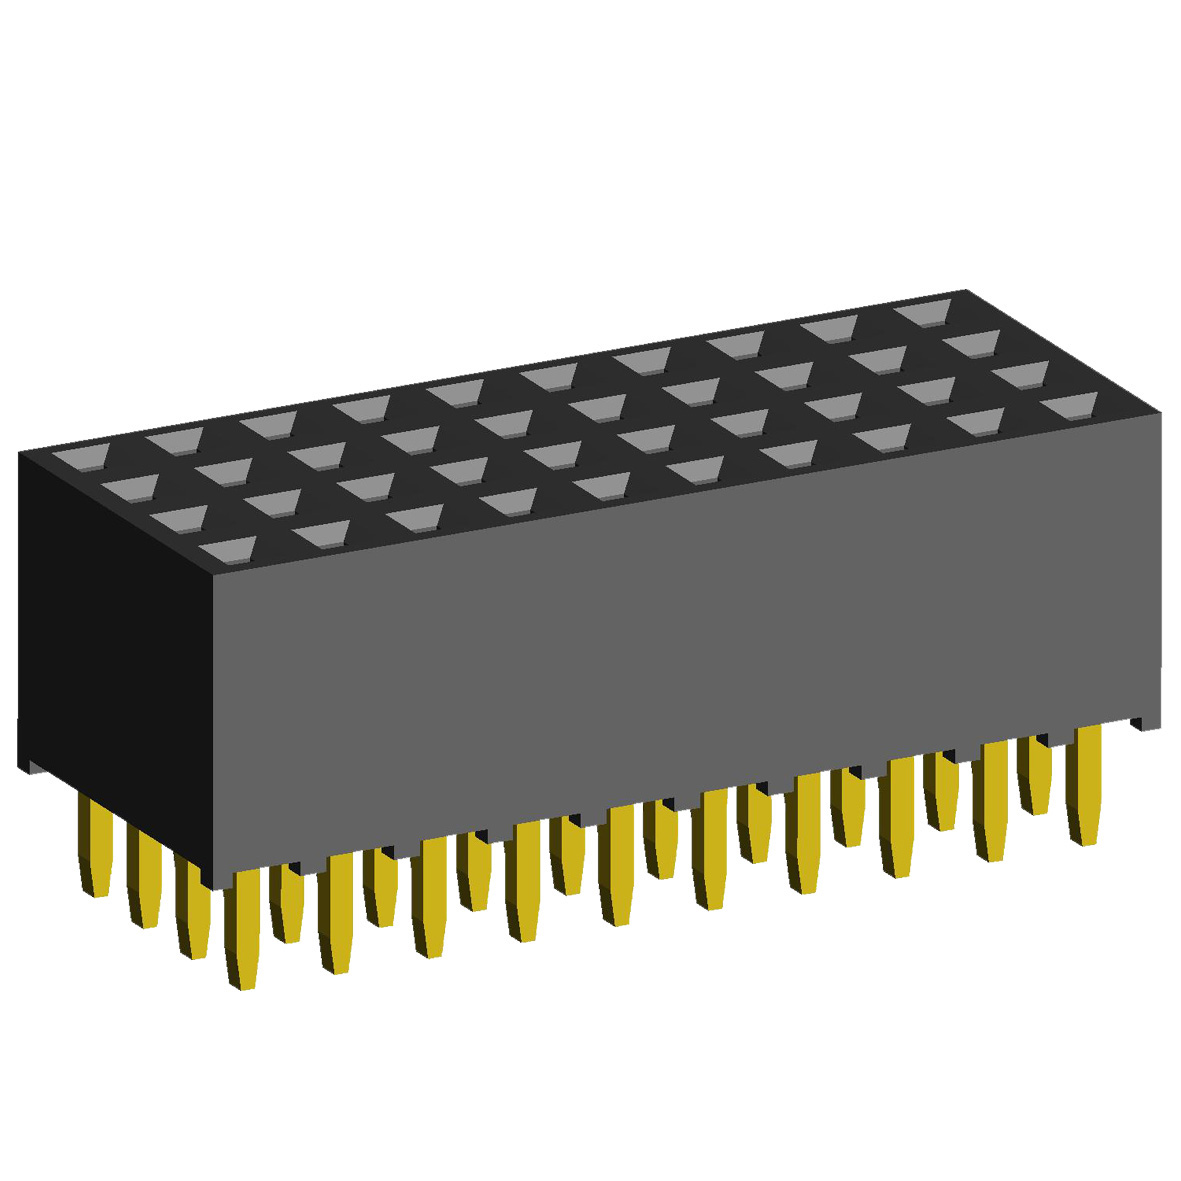 1999S-XXXG-635 series, four-row sockets straight to the Board for mounting holes, pitch 2,0x2,0 mm, Board-to-Board connectors, pin headers and sockets > pitch 2,0x2,0 mm